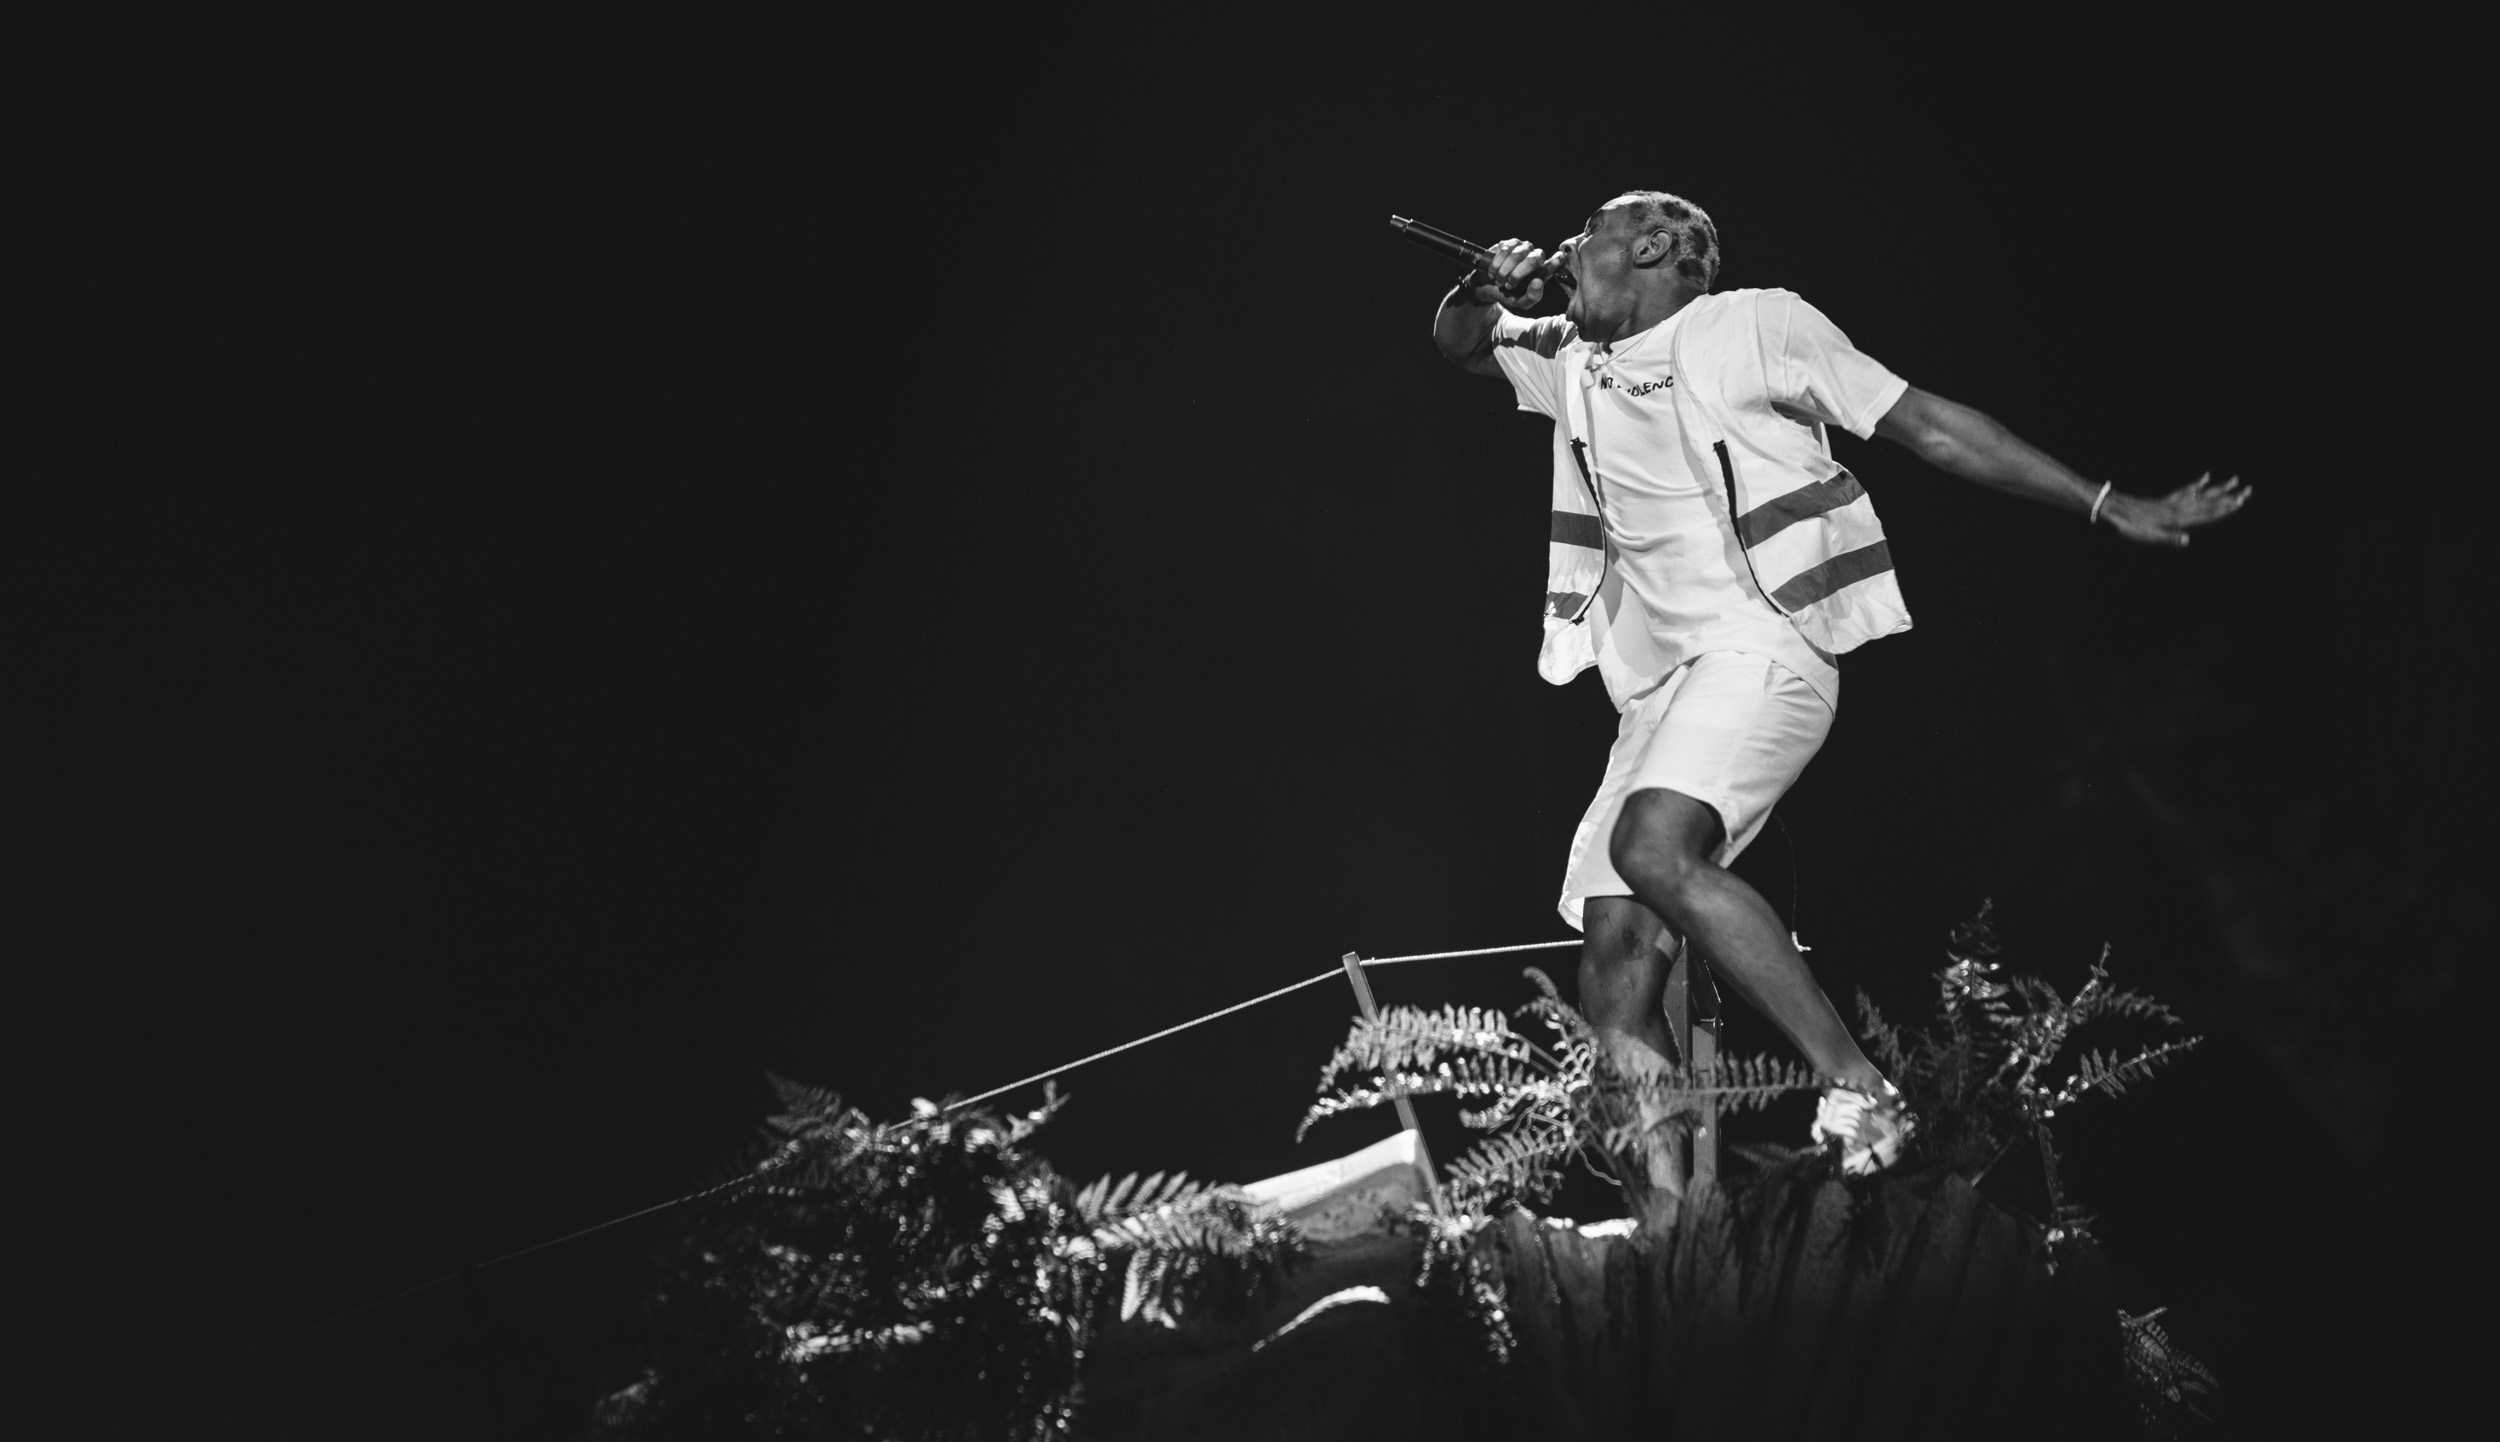 Tyler, The Creator at Coachella 2018 - photographed with a Sony a7R III - Sigma 85mm f/1.4 Art - Sigma MC‑11 Mount Converter